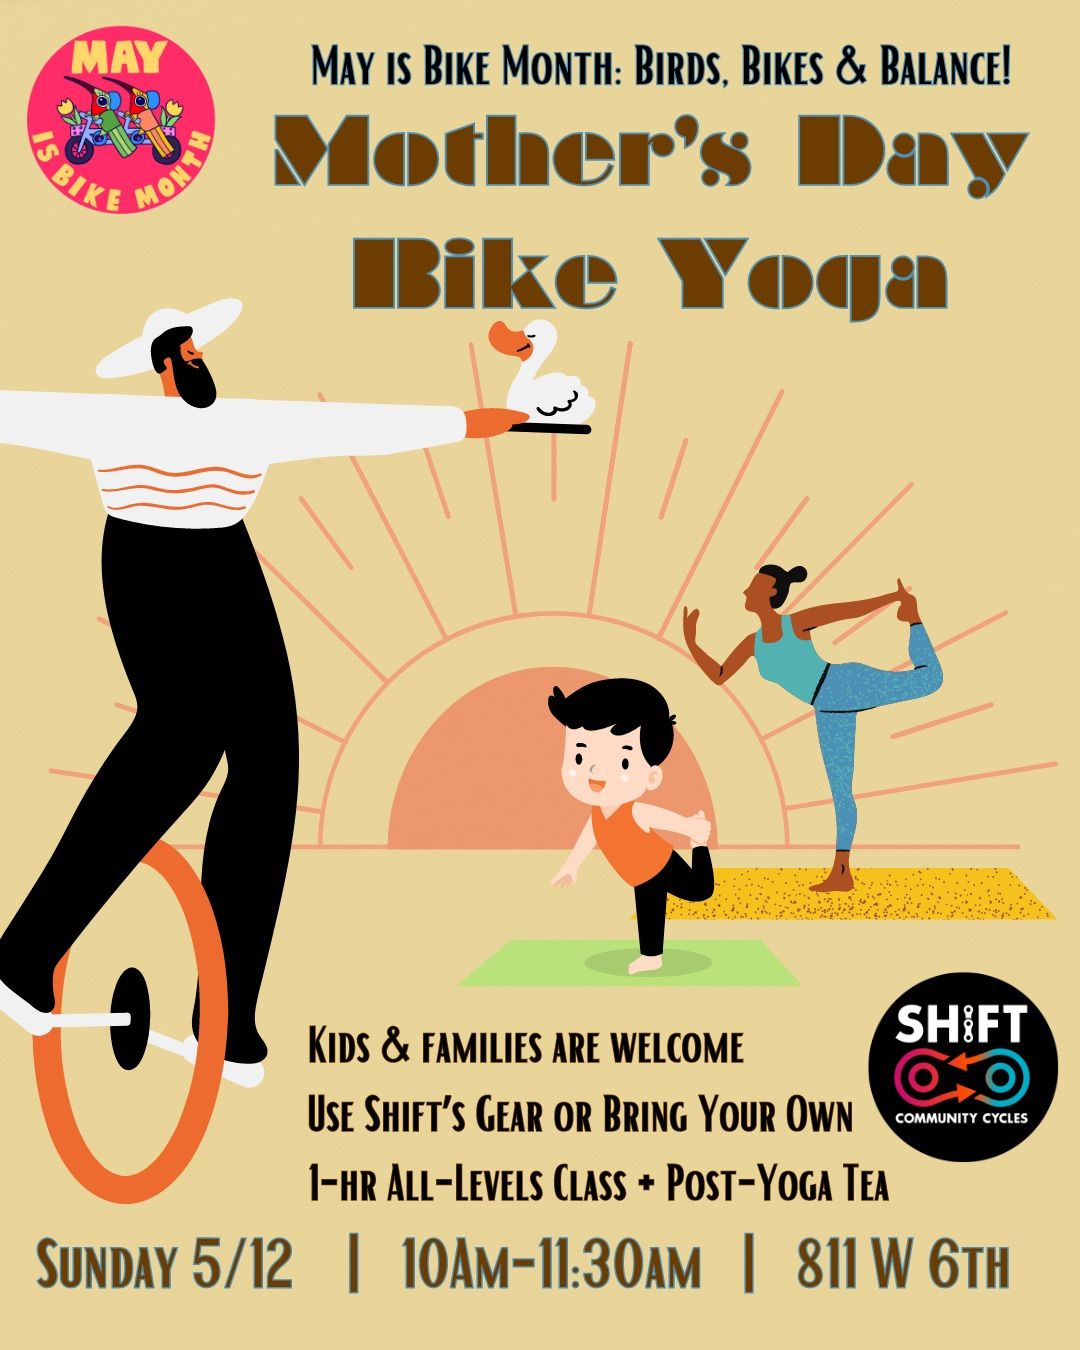 Mother\u2019s Day Bike Yoga: Birds, Bikes & Balance! (A May Is Bike Month Event)